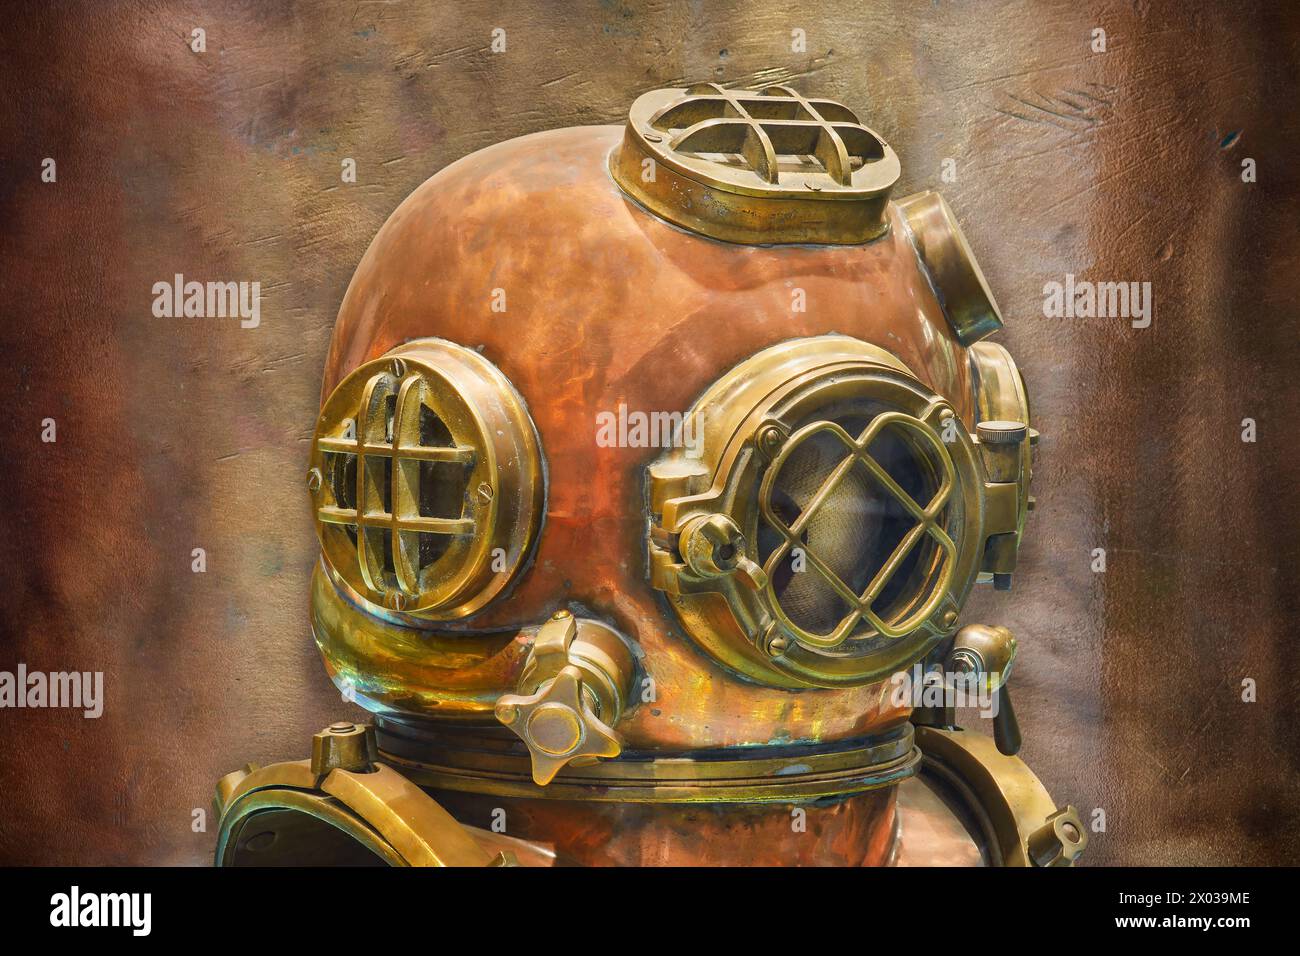 Retro styled image of an authentic US Navy diving helmet Stock Photo